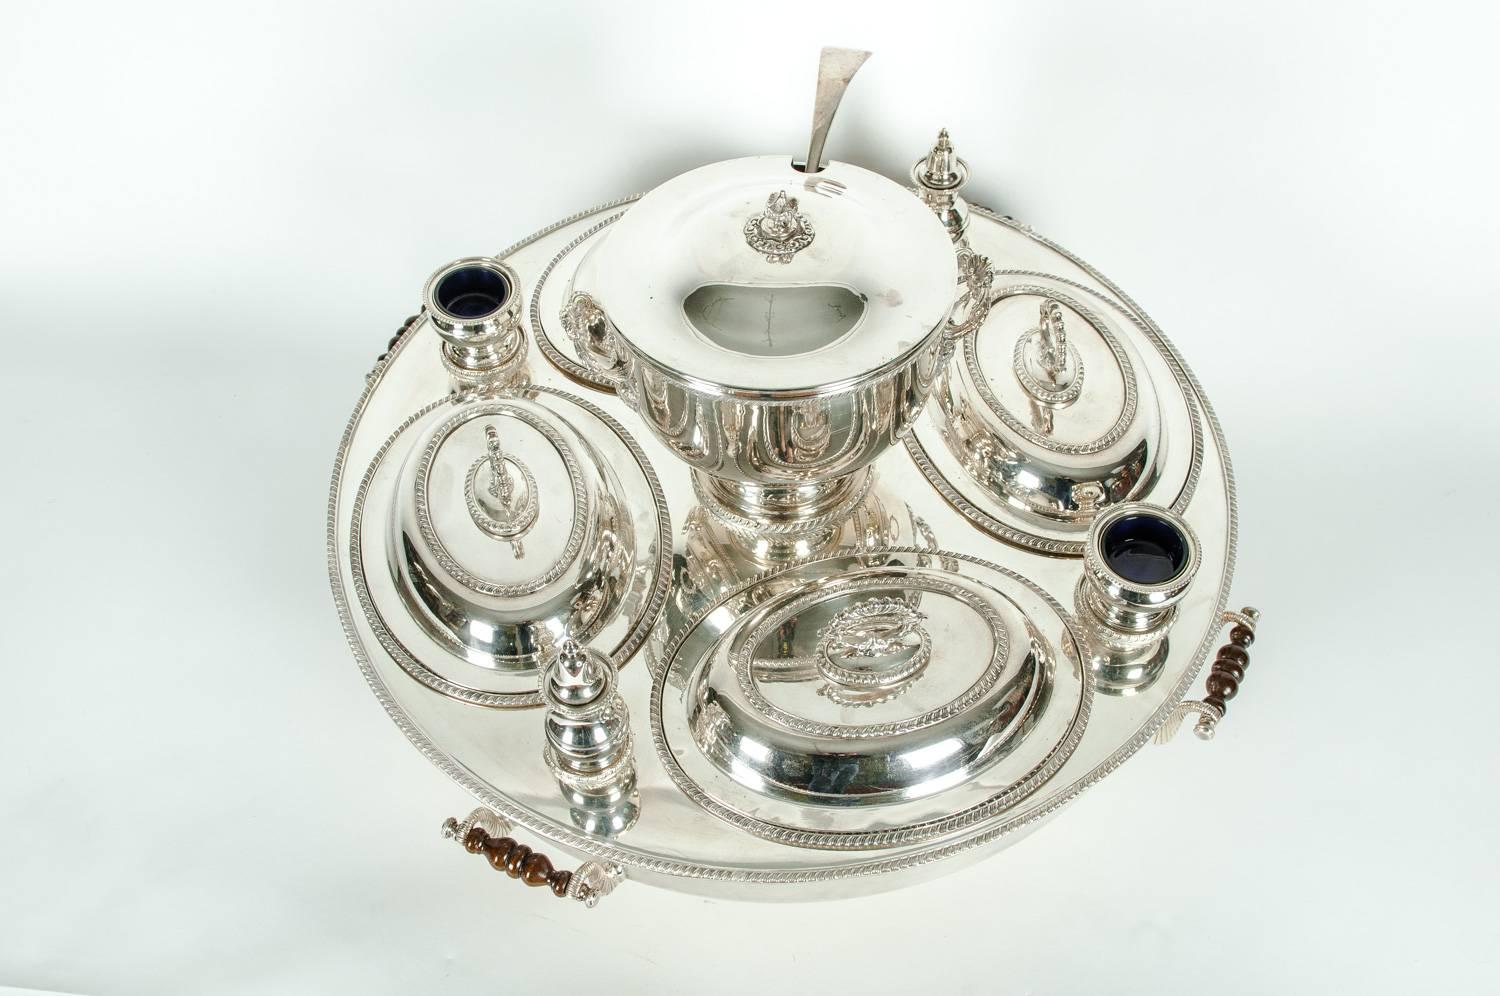 English very large silver plated / copper revolving center table super dish with four wood side handles and exterior design details with two cobalt blue insert dish. This super dish is just exquisite, each piece is detachable for storage and